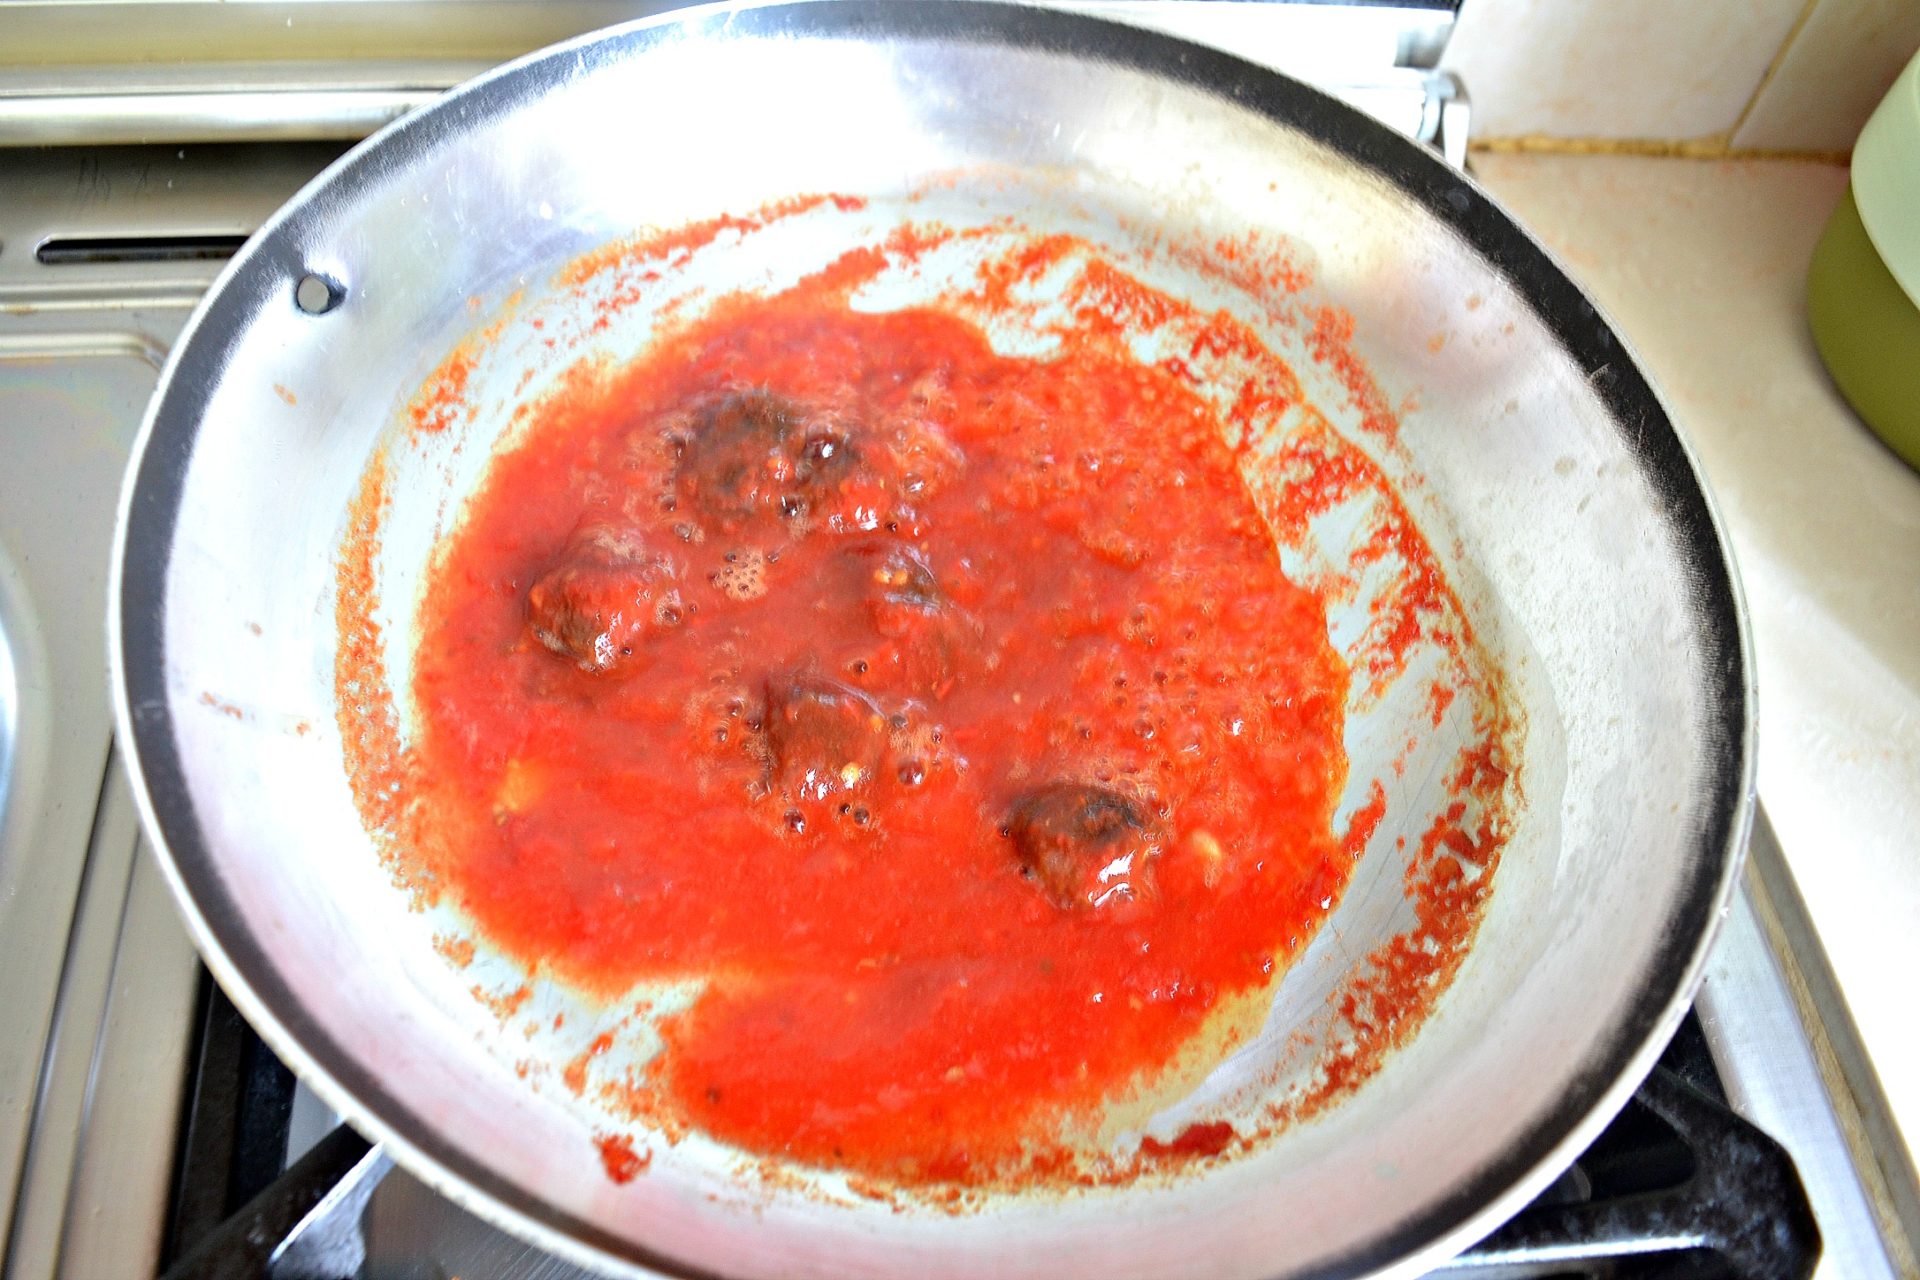 the sweet and sour sauce is ready when it thisckenca and darkens_kaluhiskitchen.com